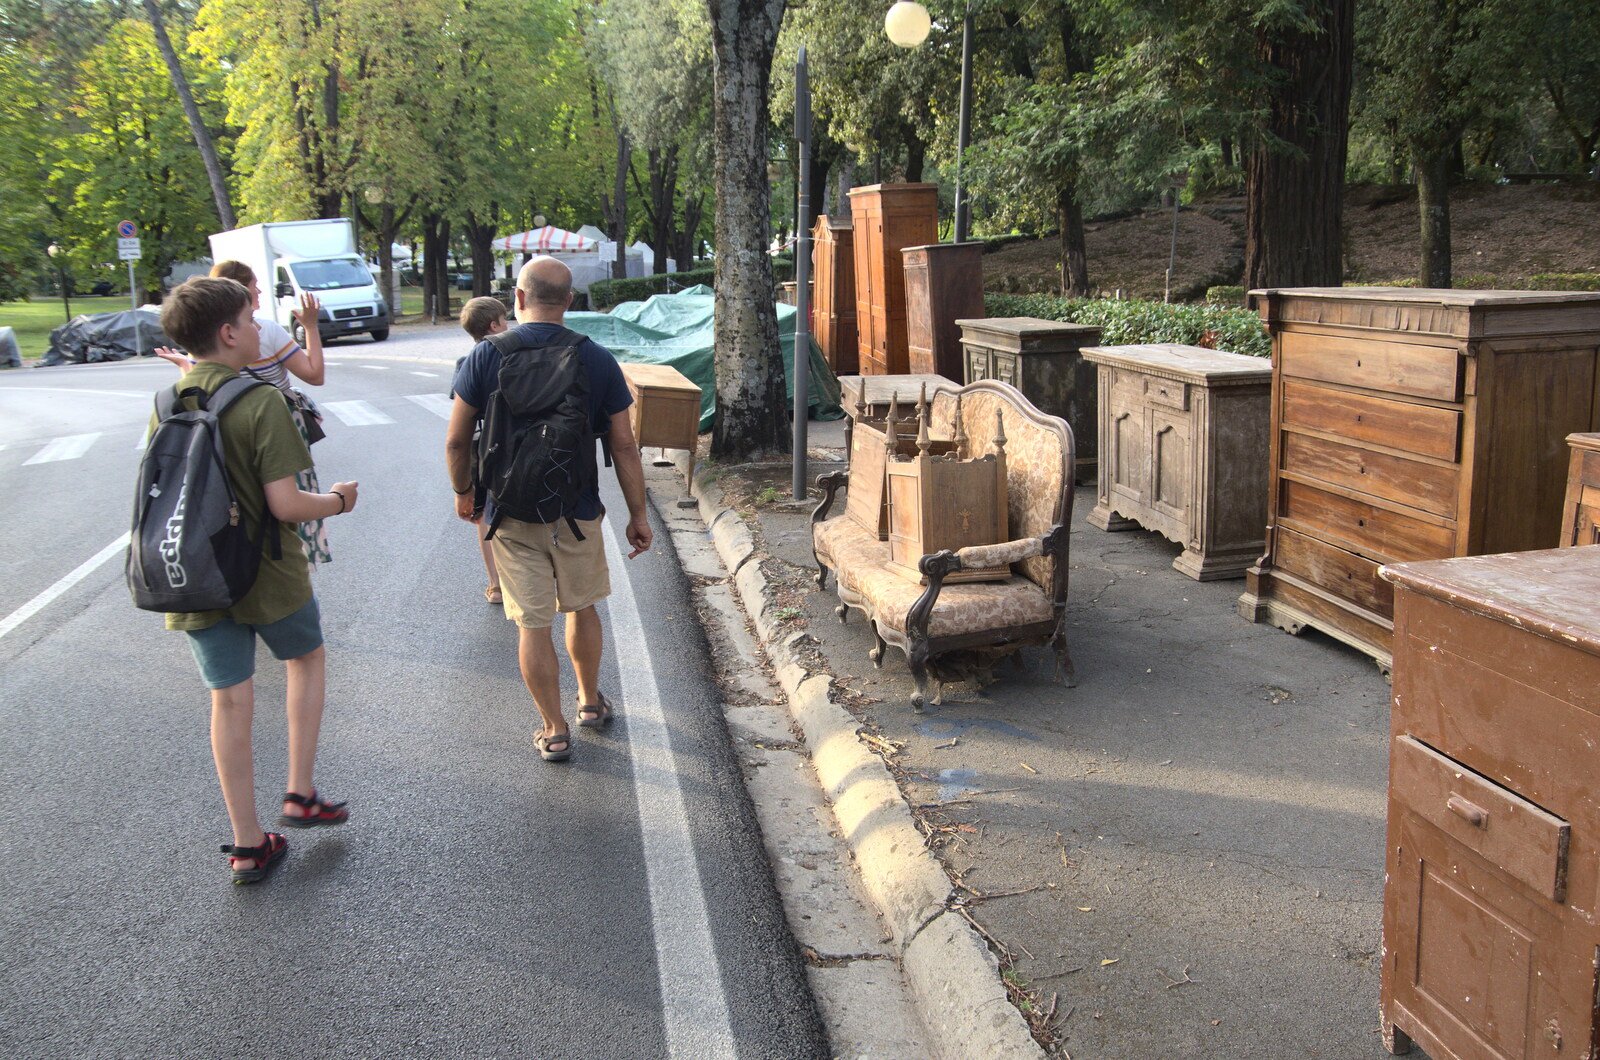 A Day by the Pool and a Festival Rehearsal, Arezzo, Italy - 3rd September 2022: We walk past a load of cool antique furniture